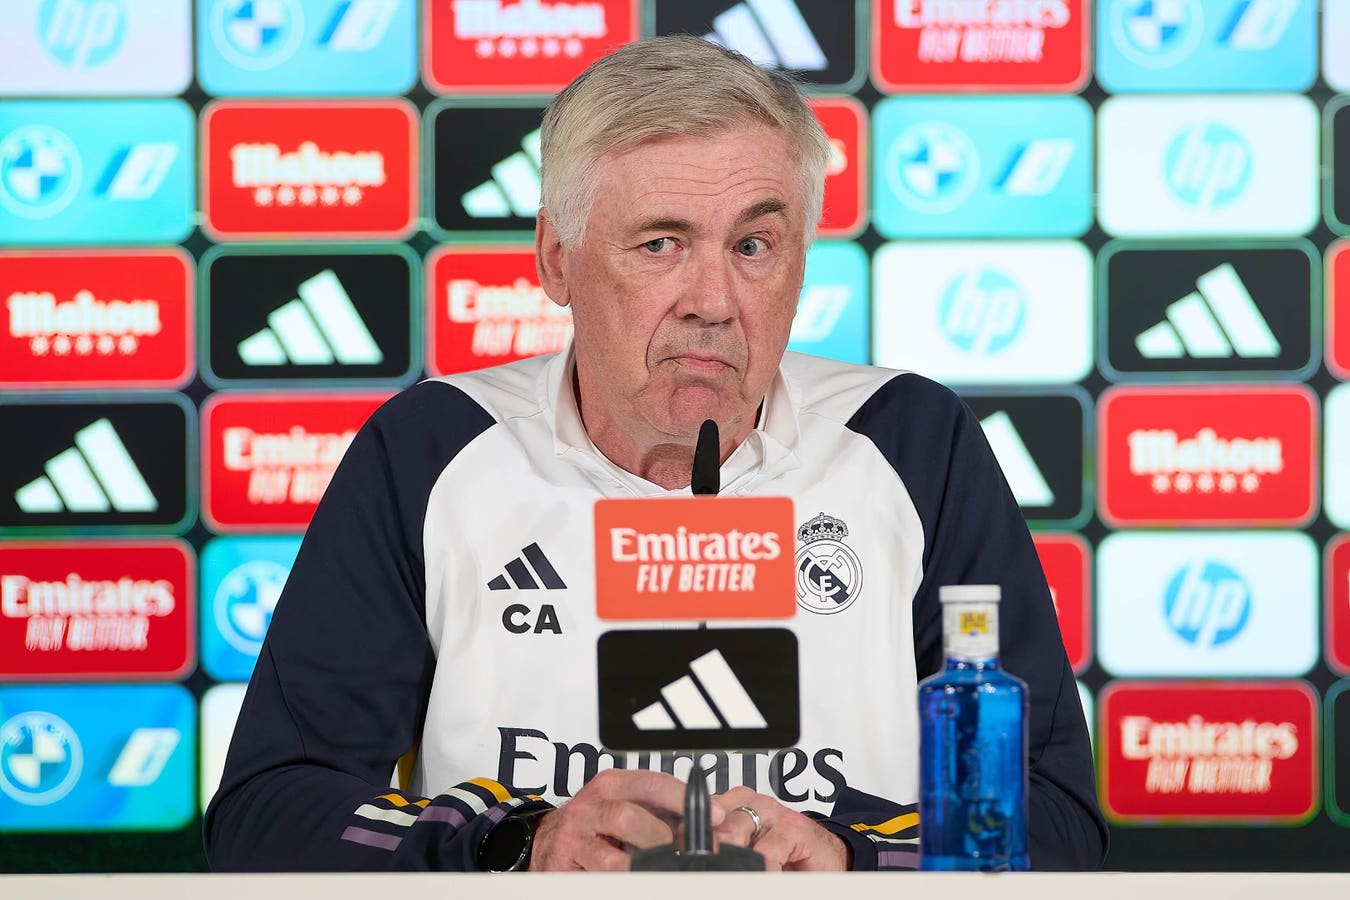 Real Madrid Coach Ancelotti Says Team Is ‘Not Optimistic’ About Beating ‘Much Better’ Bayern Munich